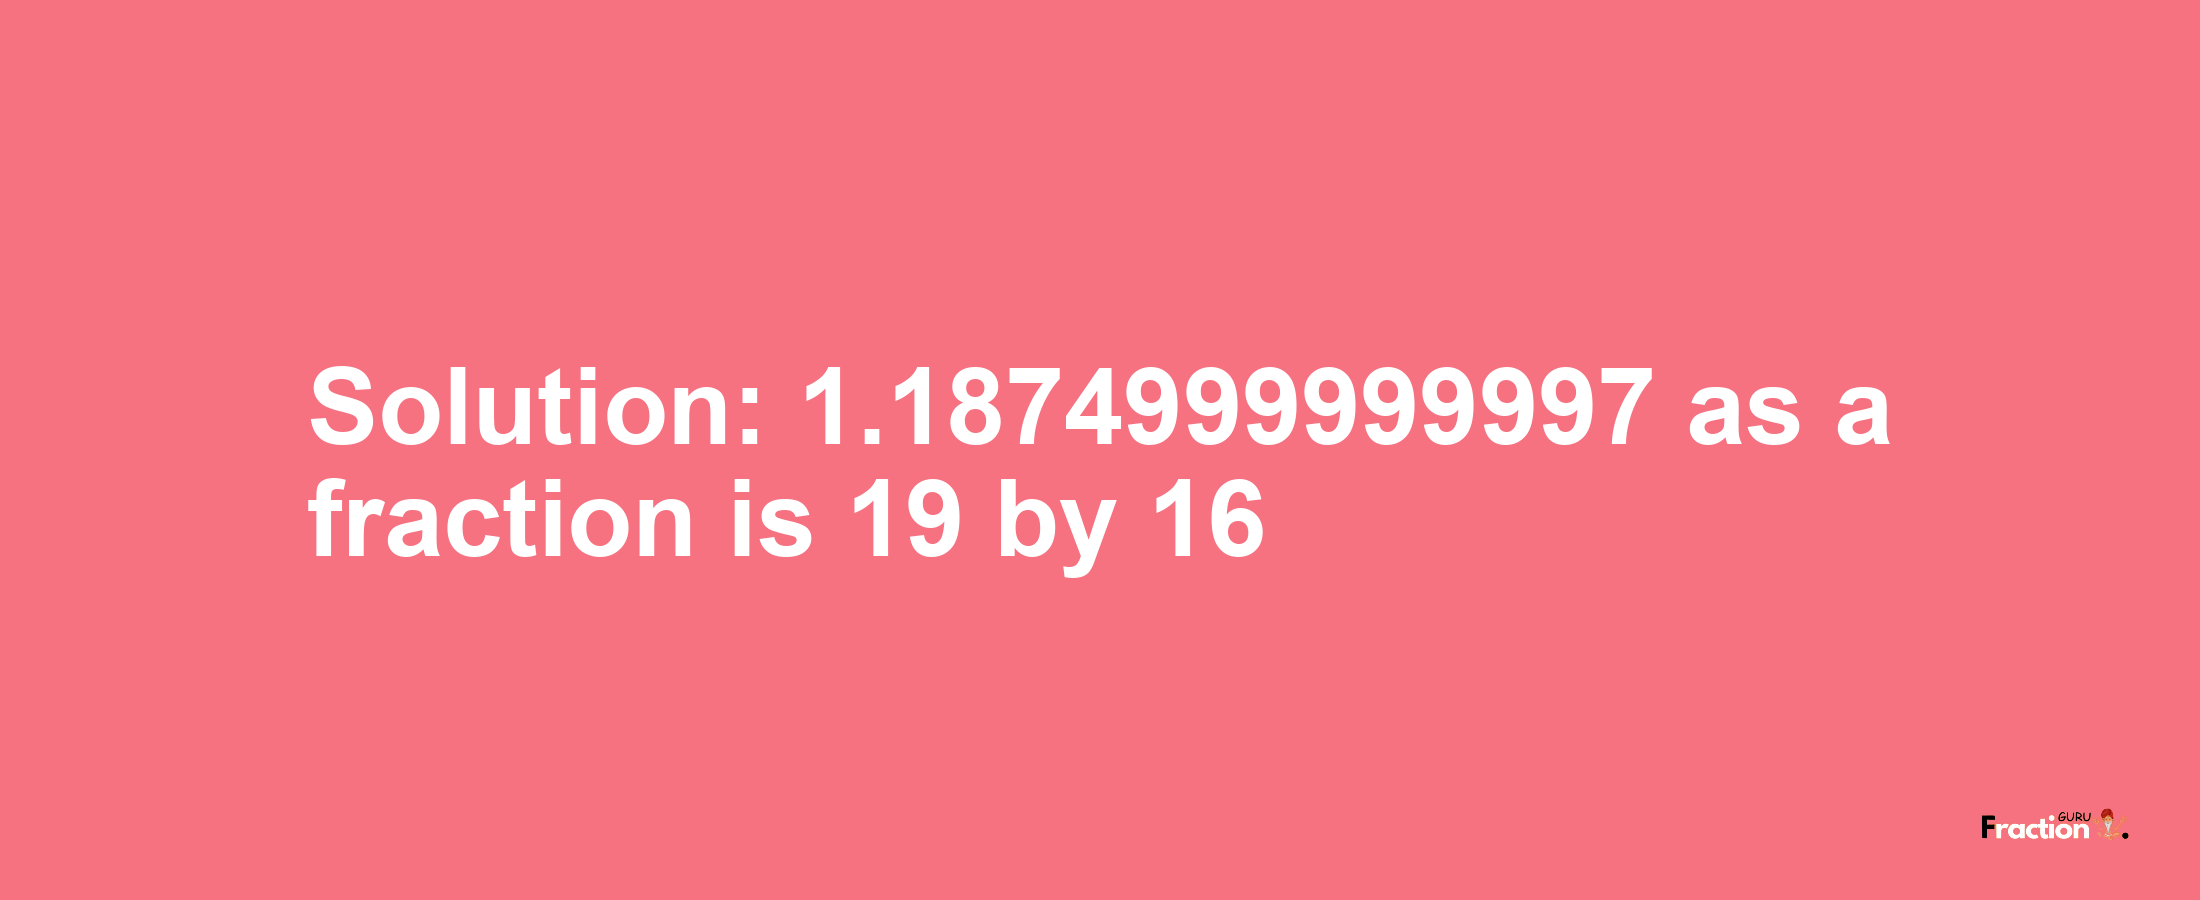 Solution:1.1874999999997 as a fraction is 19/16